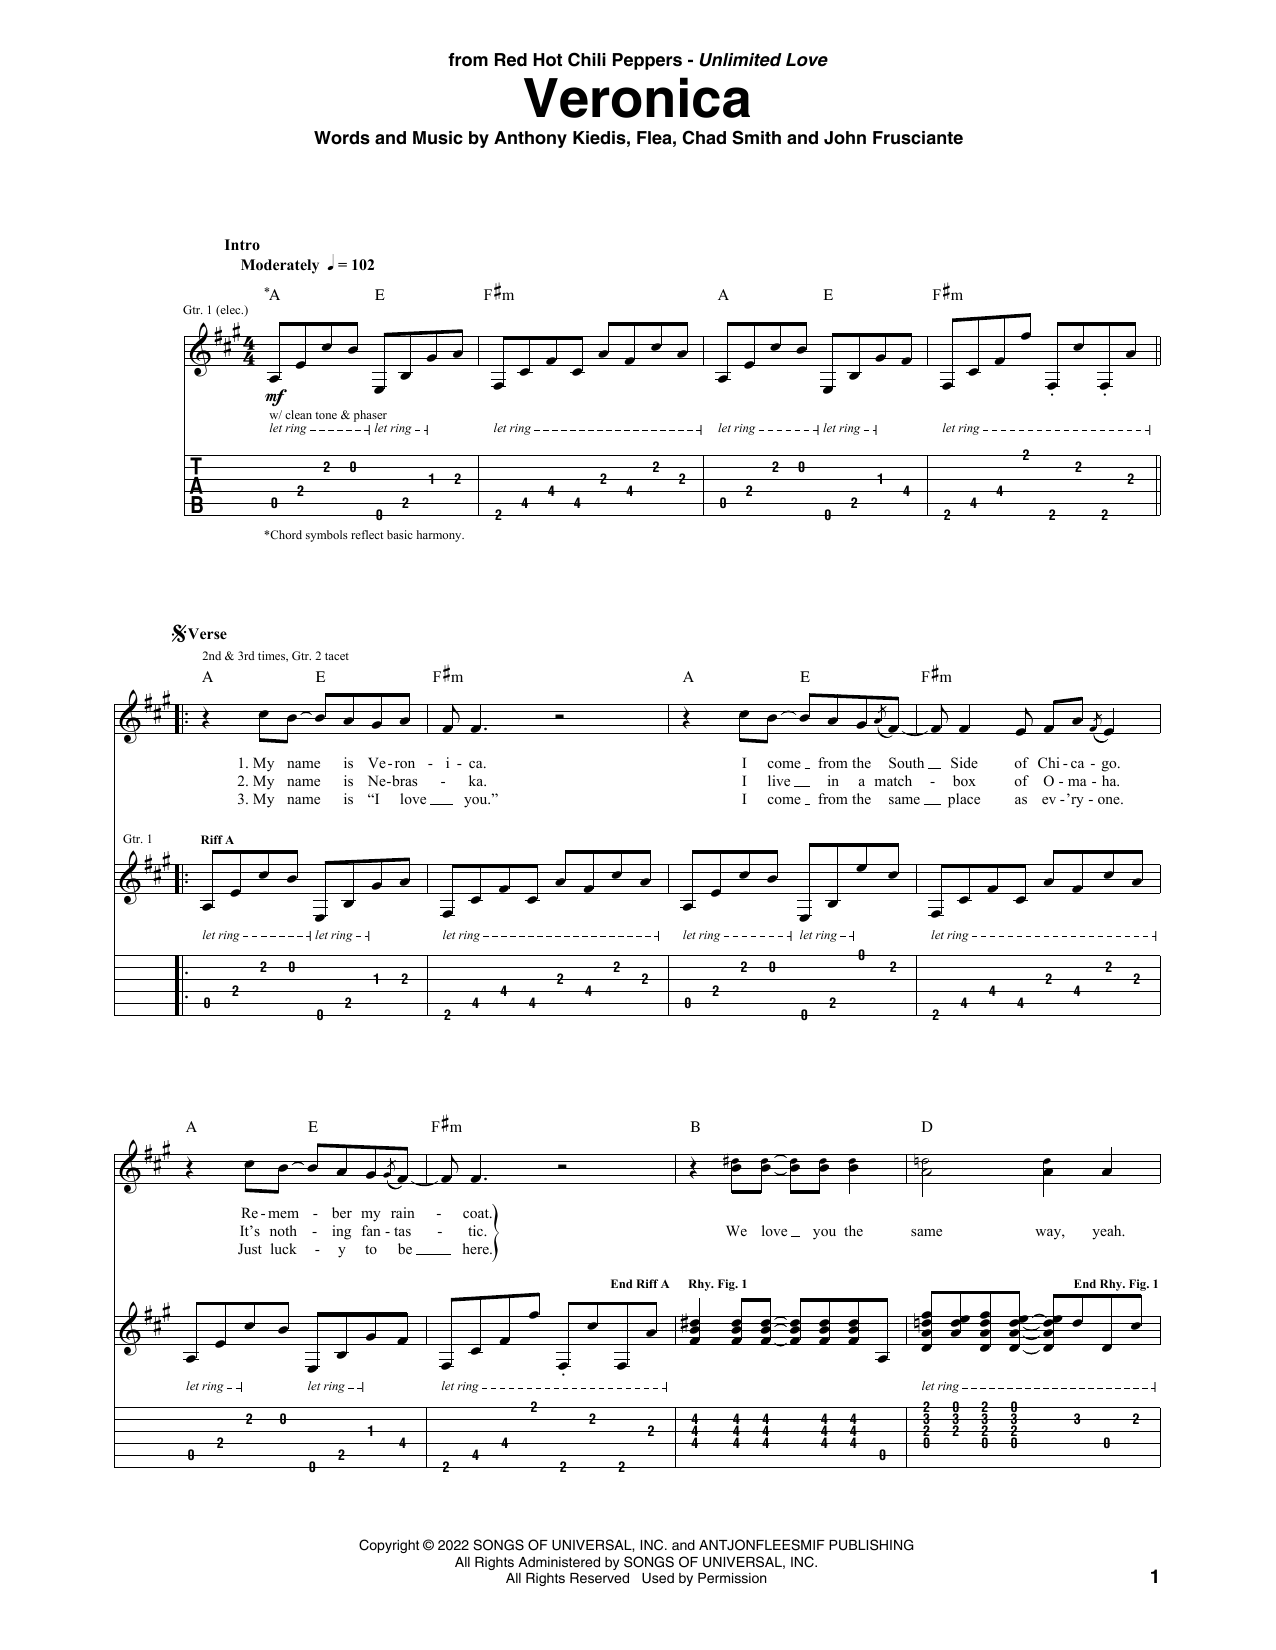 Download Red Hot Chili Peppers Veronica Sheet Music